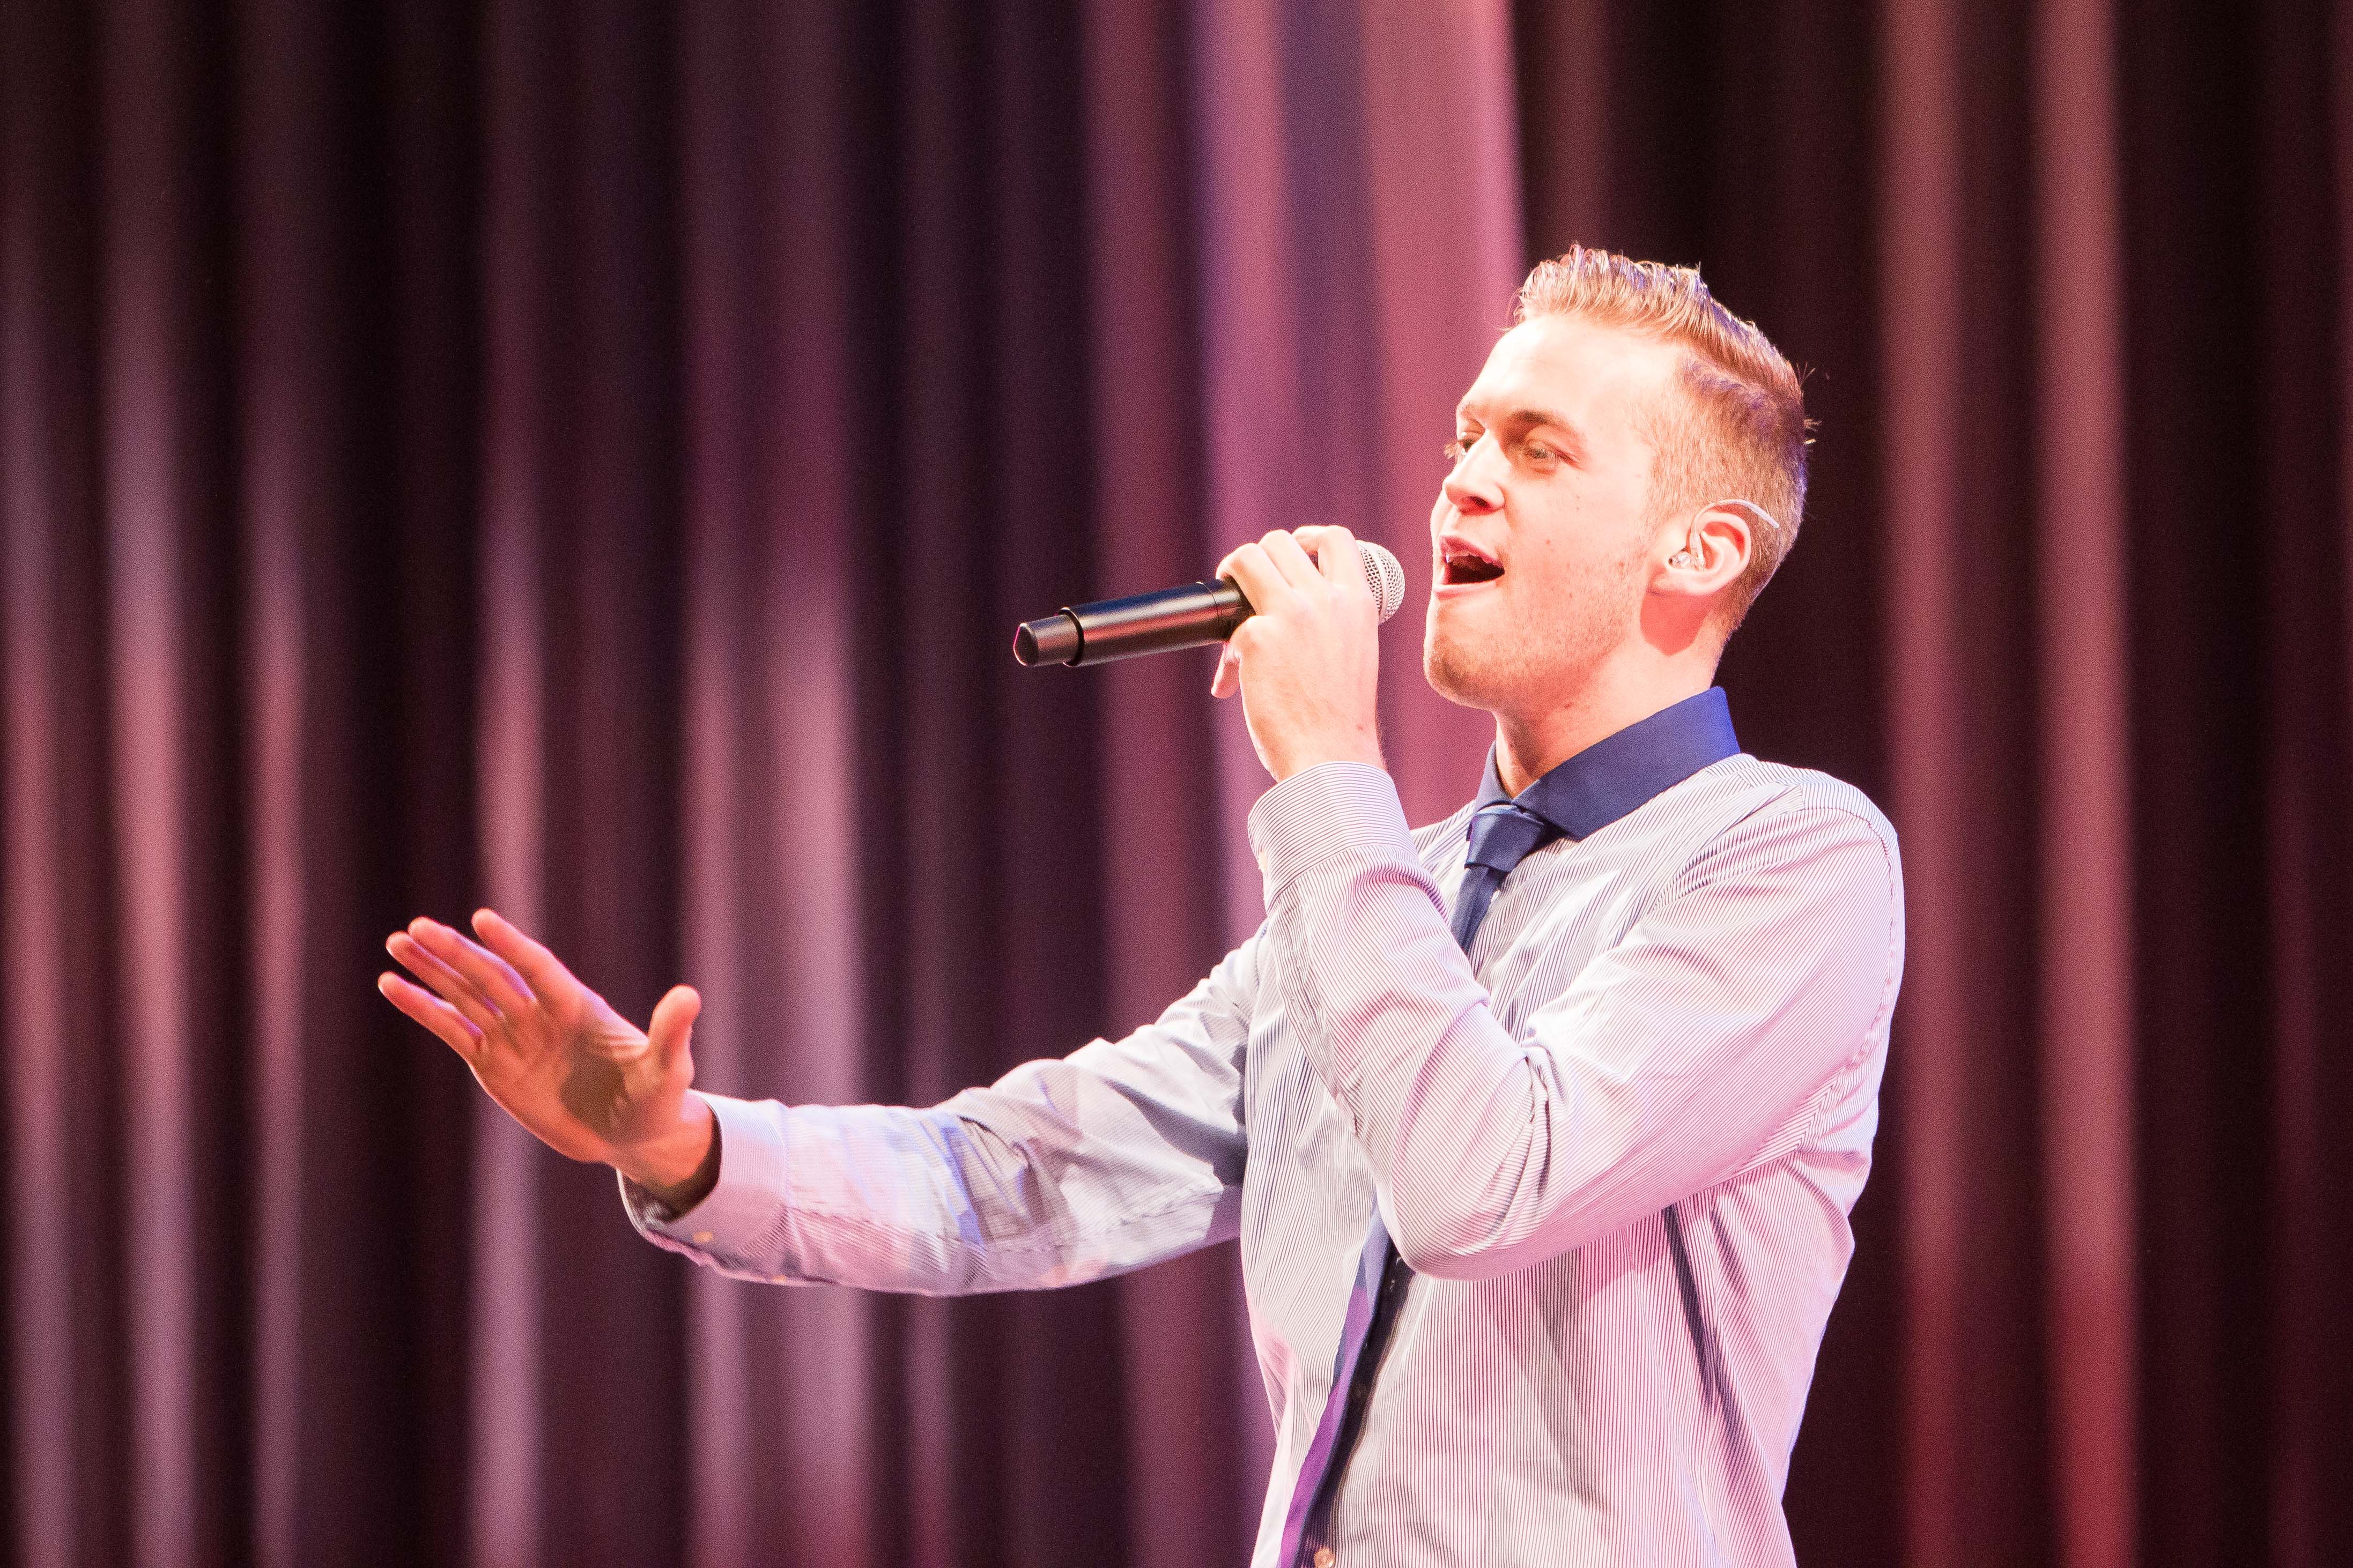 BYU Vocal Point kicks off the new year with two home concerts The